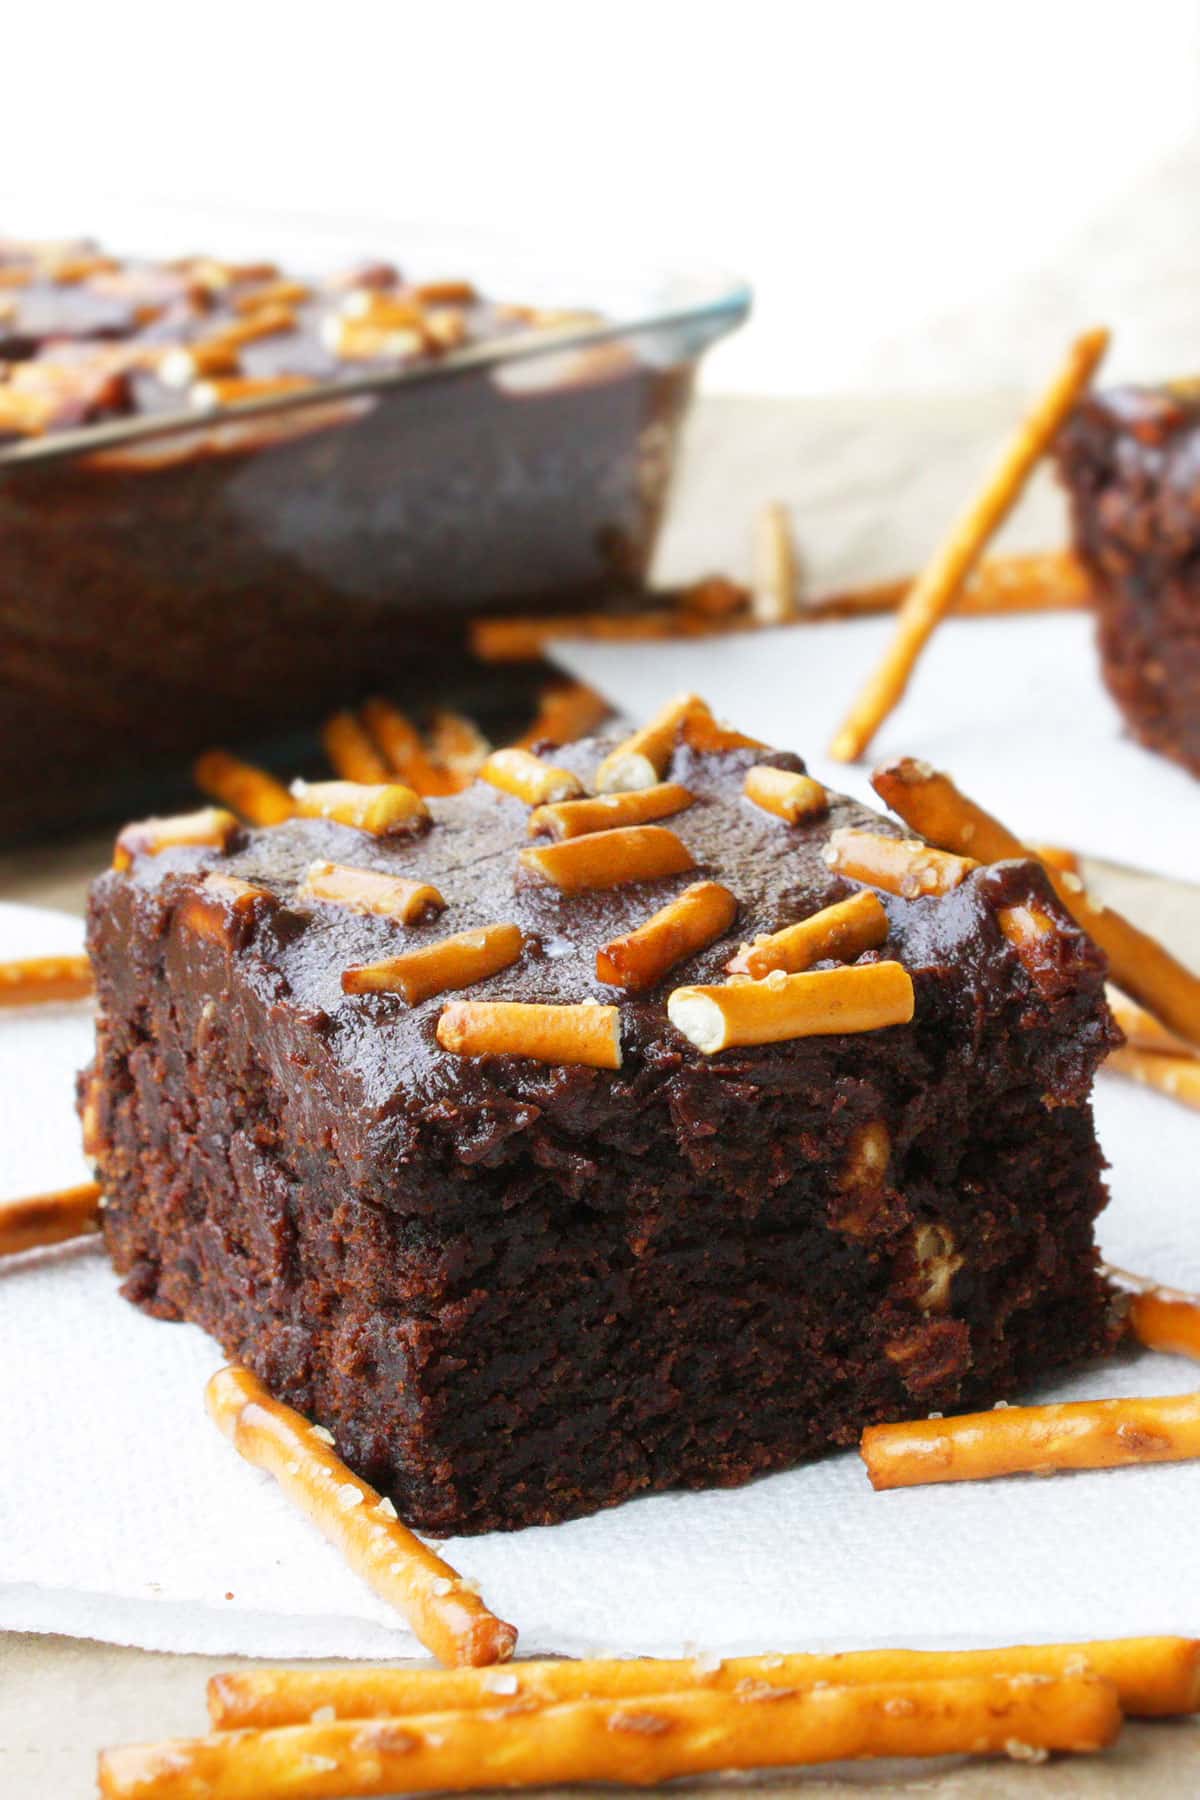 Slice of Easy Fudgy Chocolate Cake Mix Brownies With Ganache and Pretzels on White Napkin. 